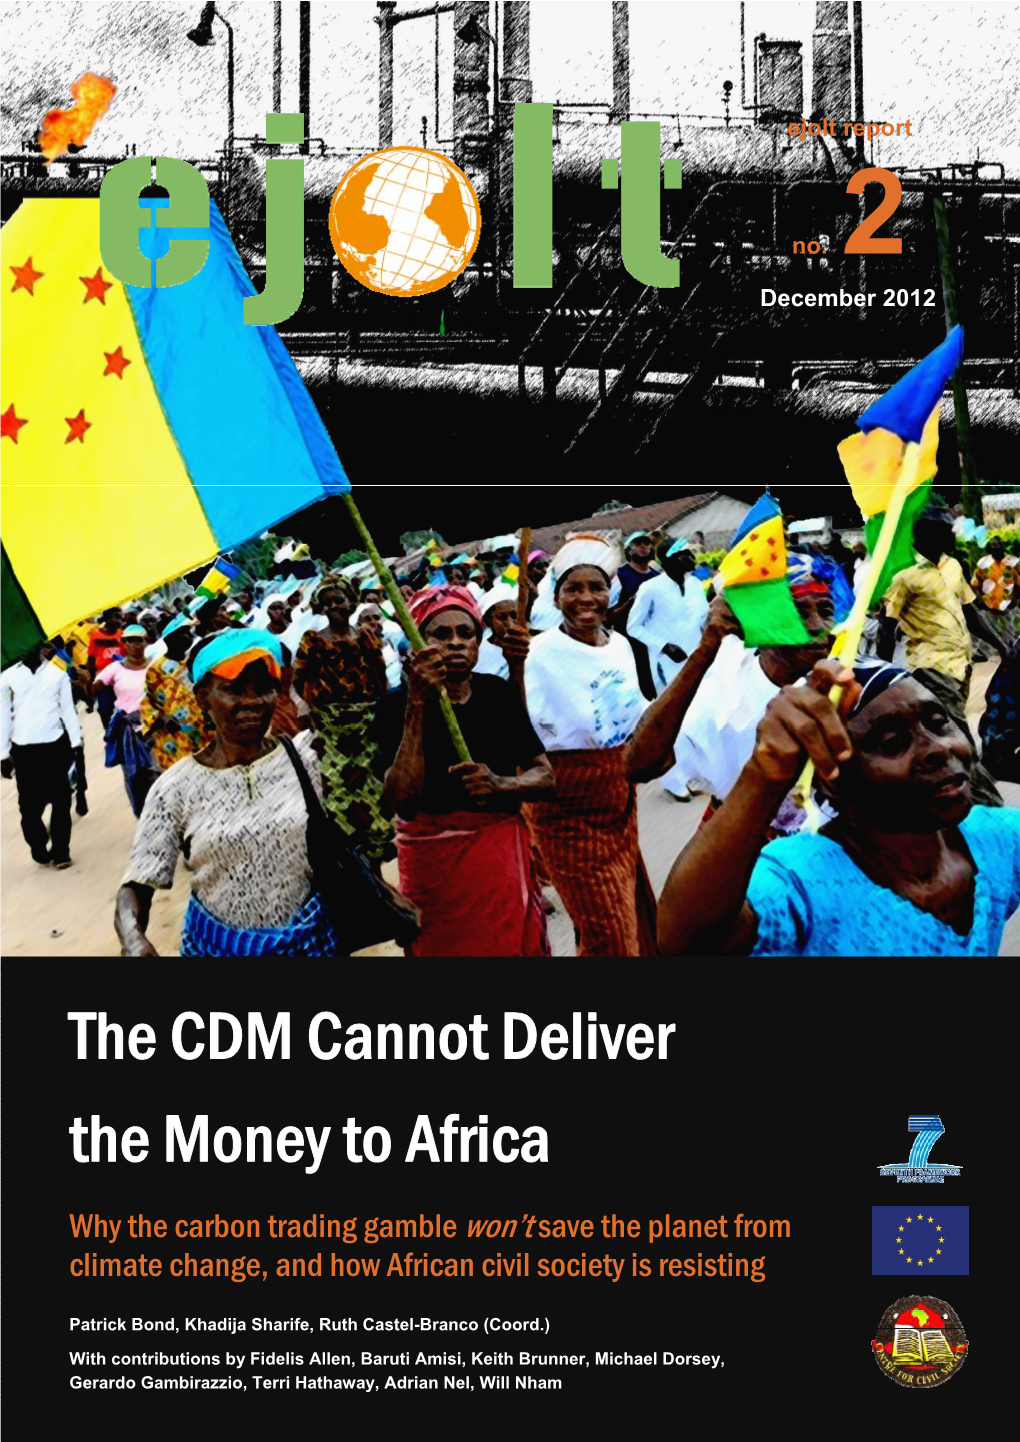 The CDM Cannot Deliver the Money to Africa – December 2012